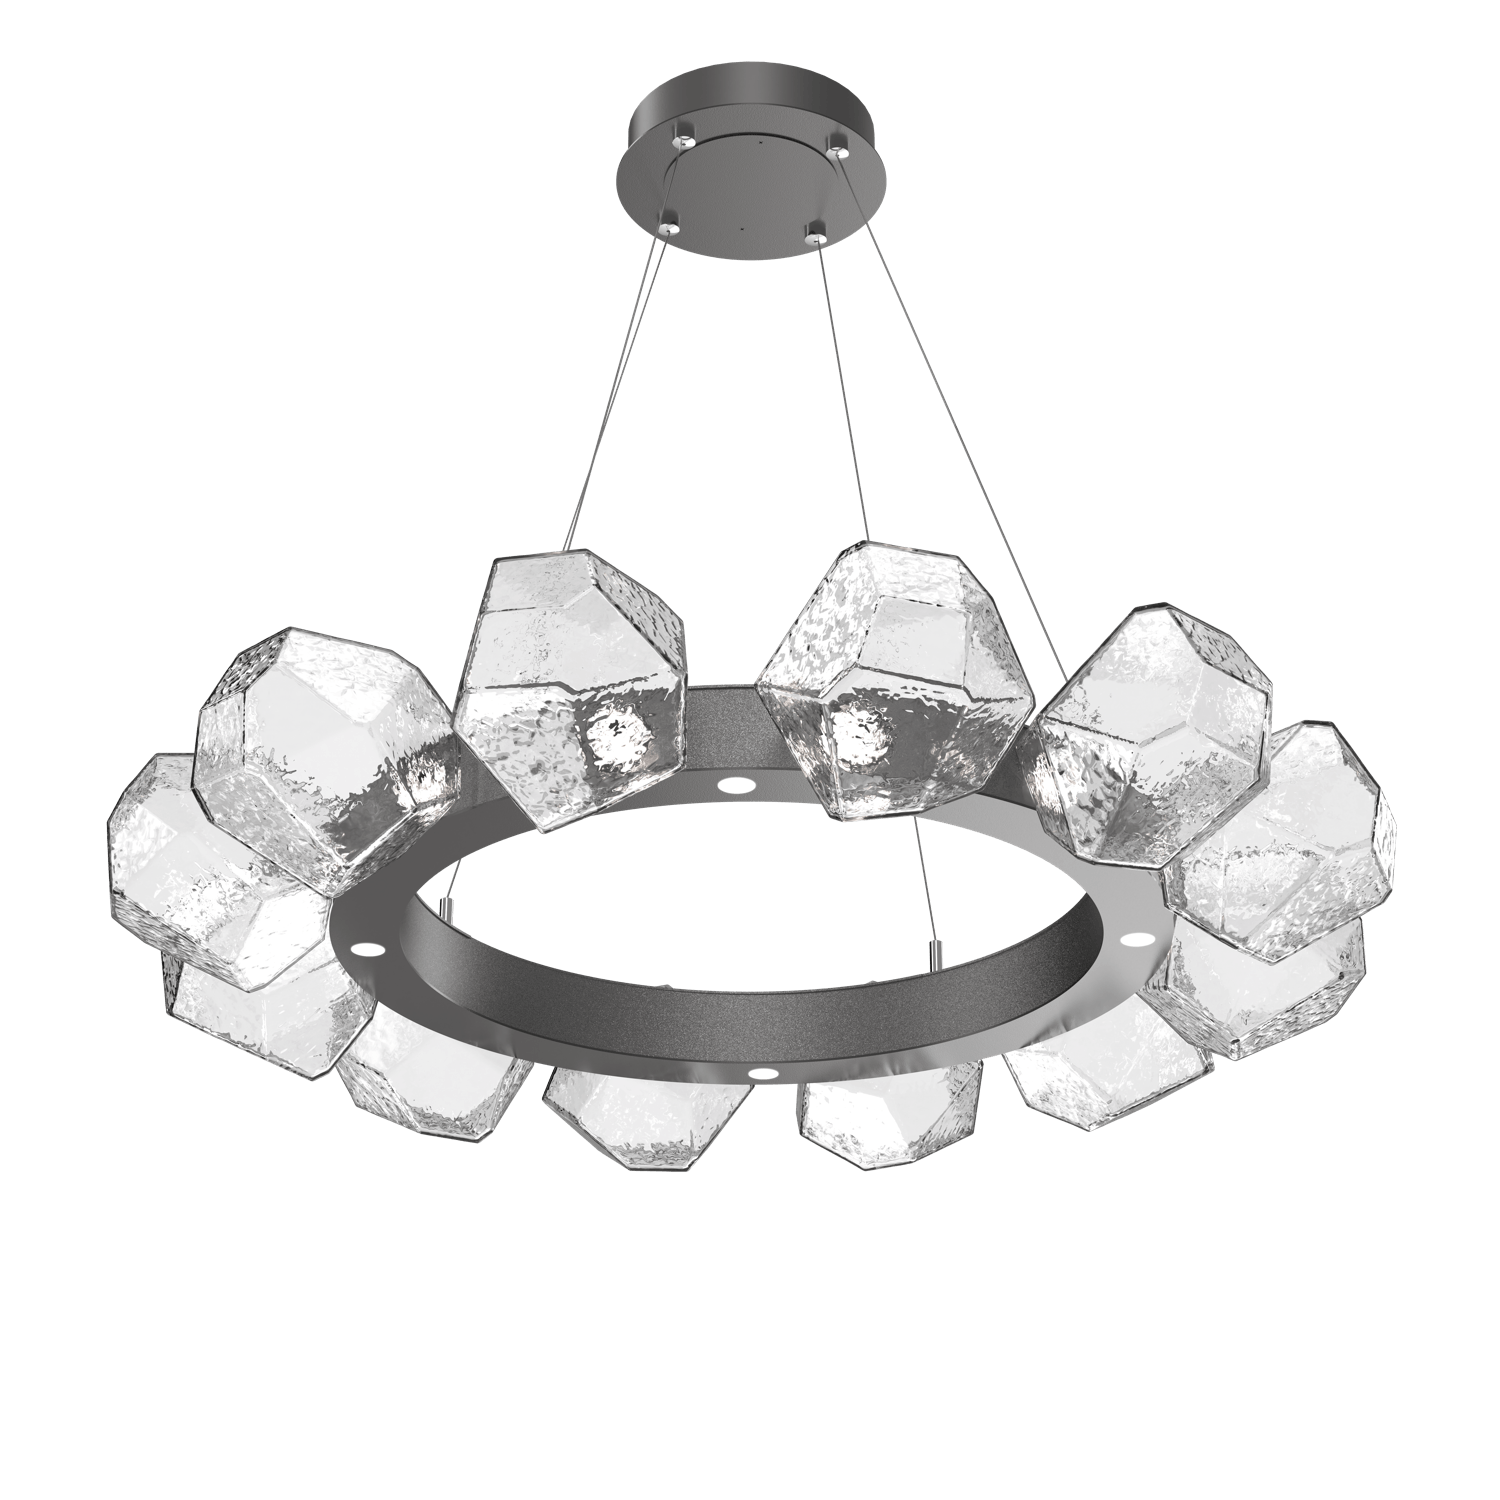 CHB0039-36-GP-C-Hammerton-Studio-Gem-36-inch-radial-ring-chandelier-with-graphite-finish-and-clear-blown-glass-shades-and-LED-lamping